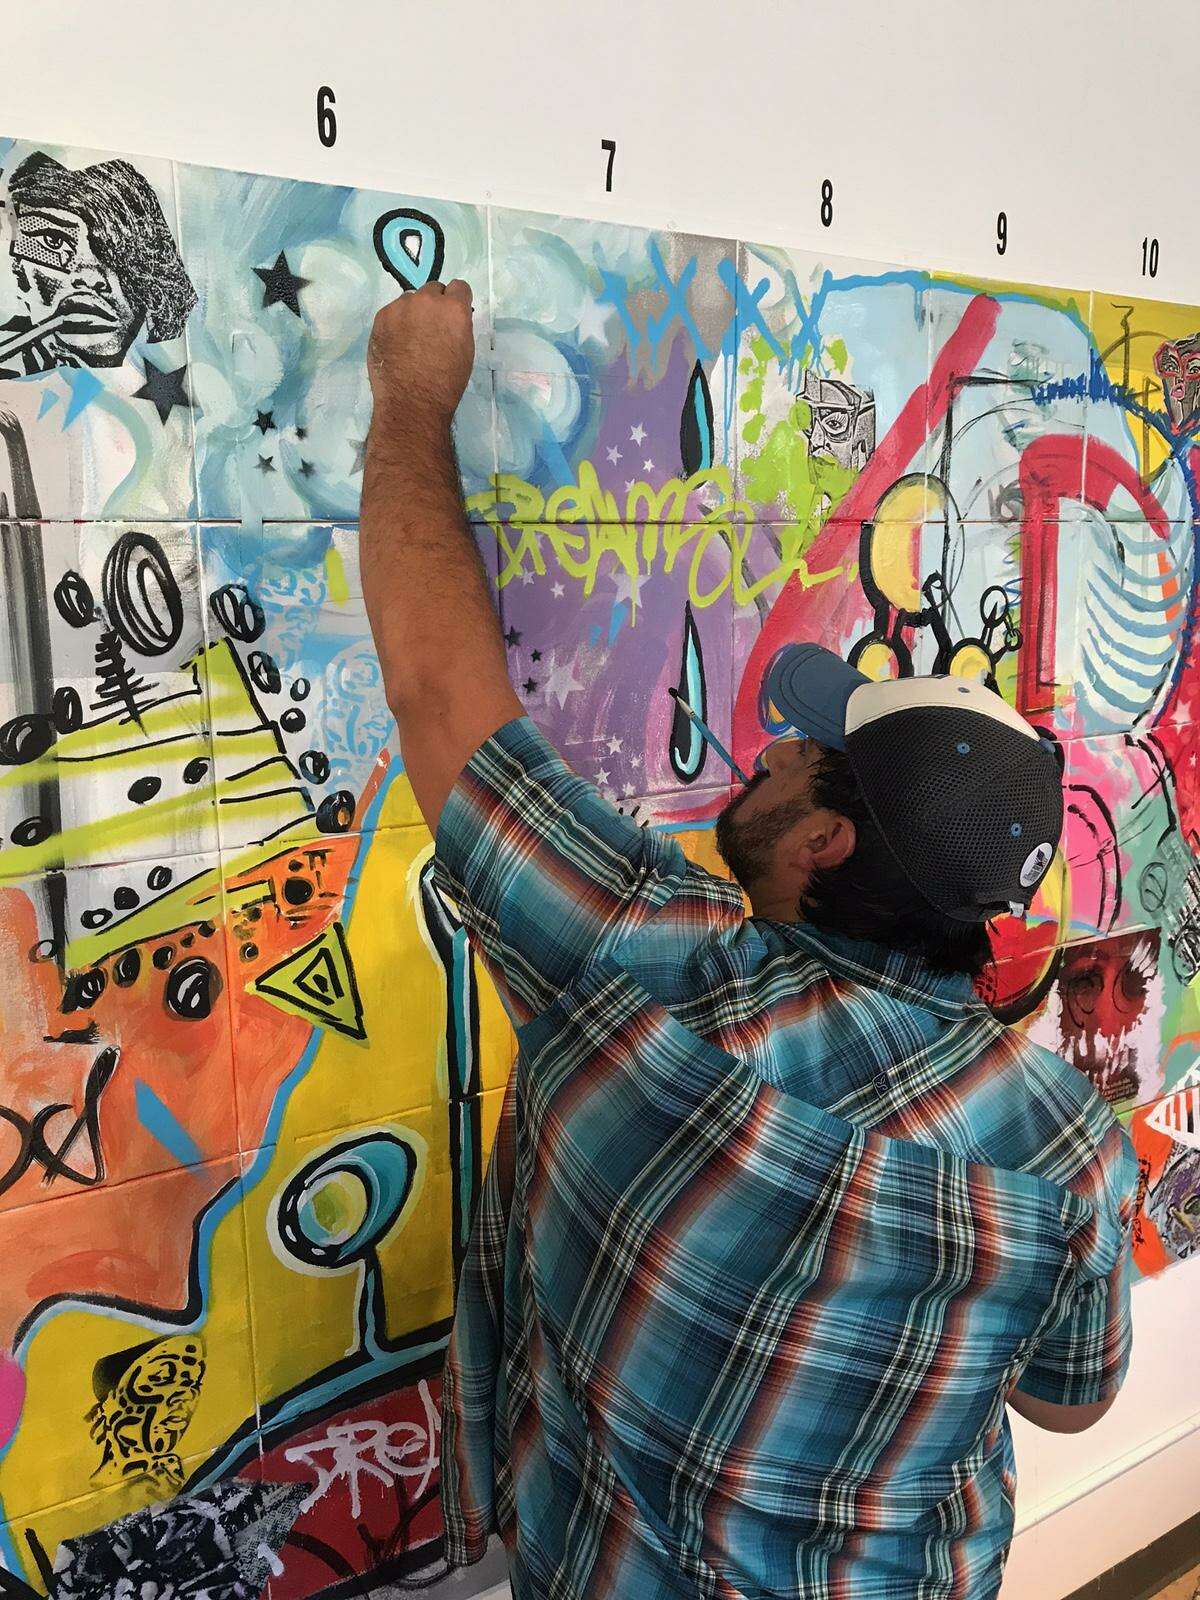 Stamford's Danger Gallery sold out its latest show, "1X1," for which seven Connecticut artists -- Holly Danger, Marc DeRosa, Marcella Kovac, Ben Quesnel, Cris Dam, Liz Squillace and Jahmane Artz -- painted a mural in front of 200 guests on Aug. 5.